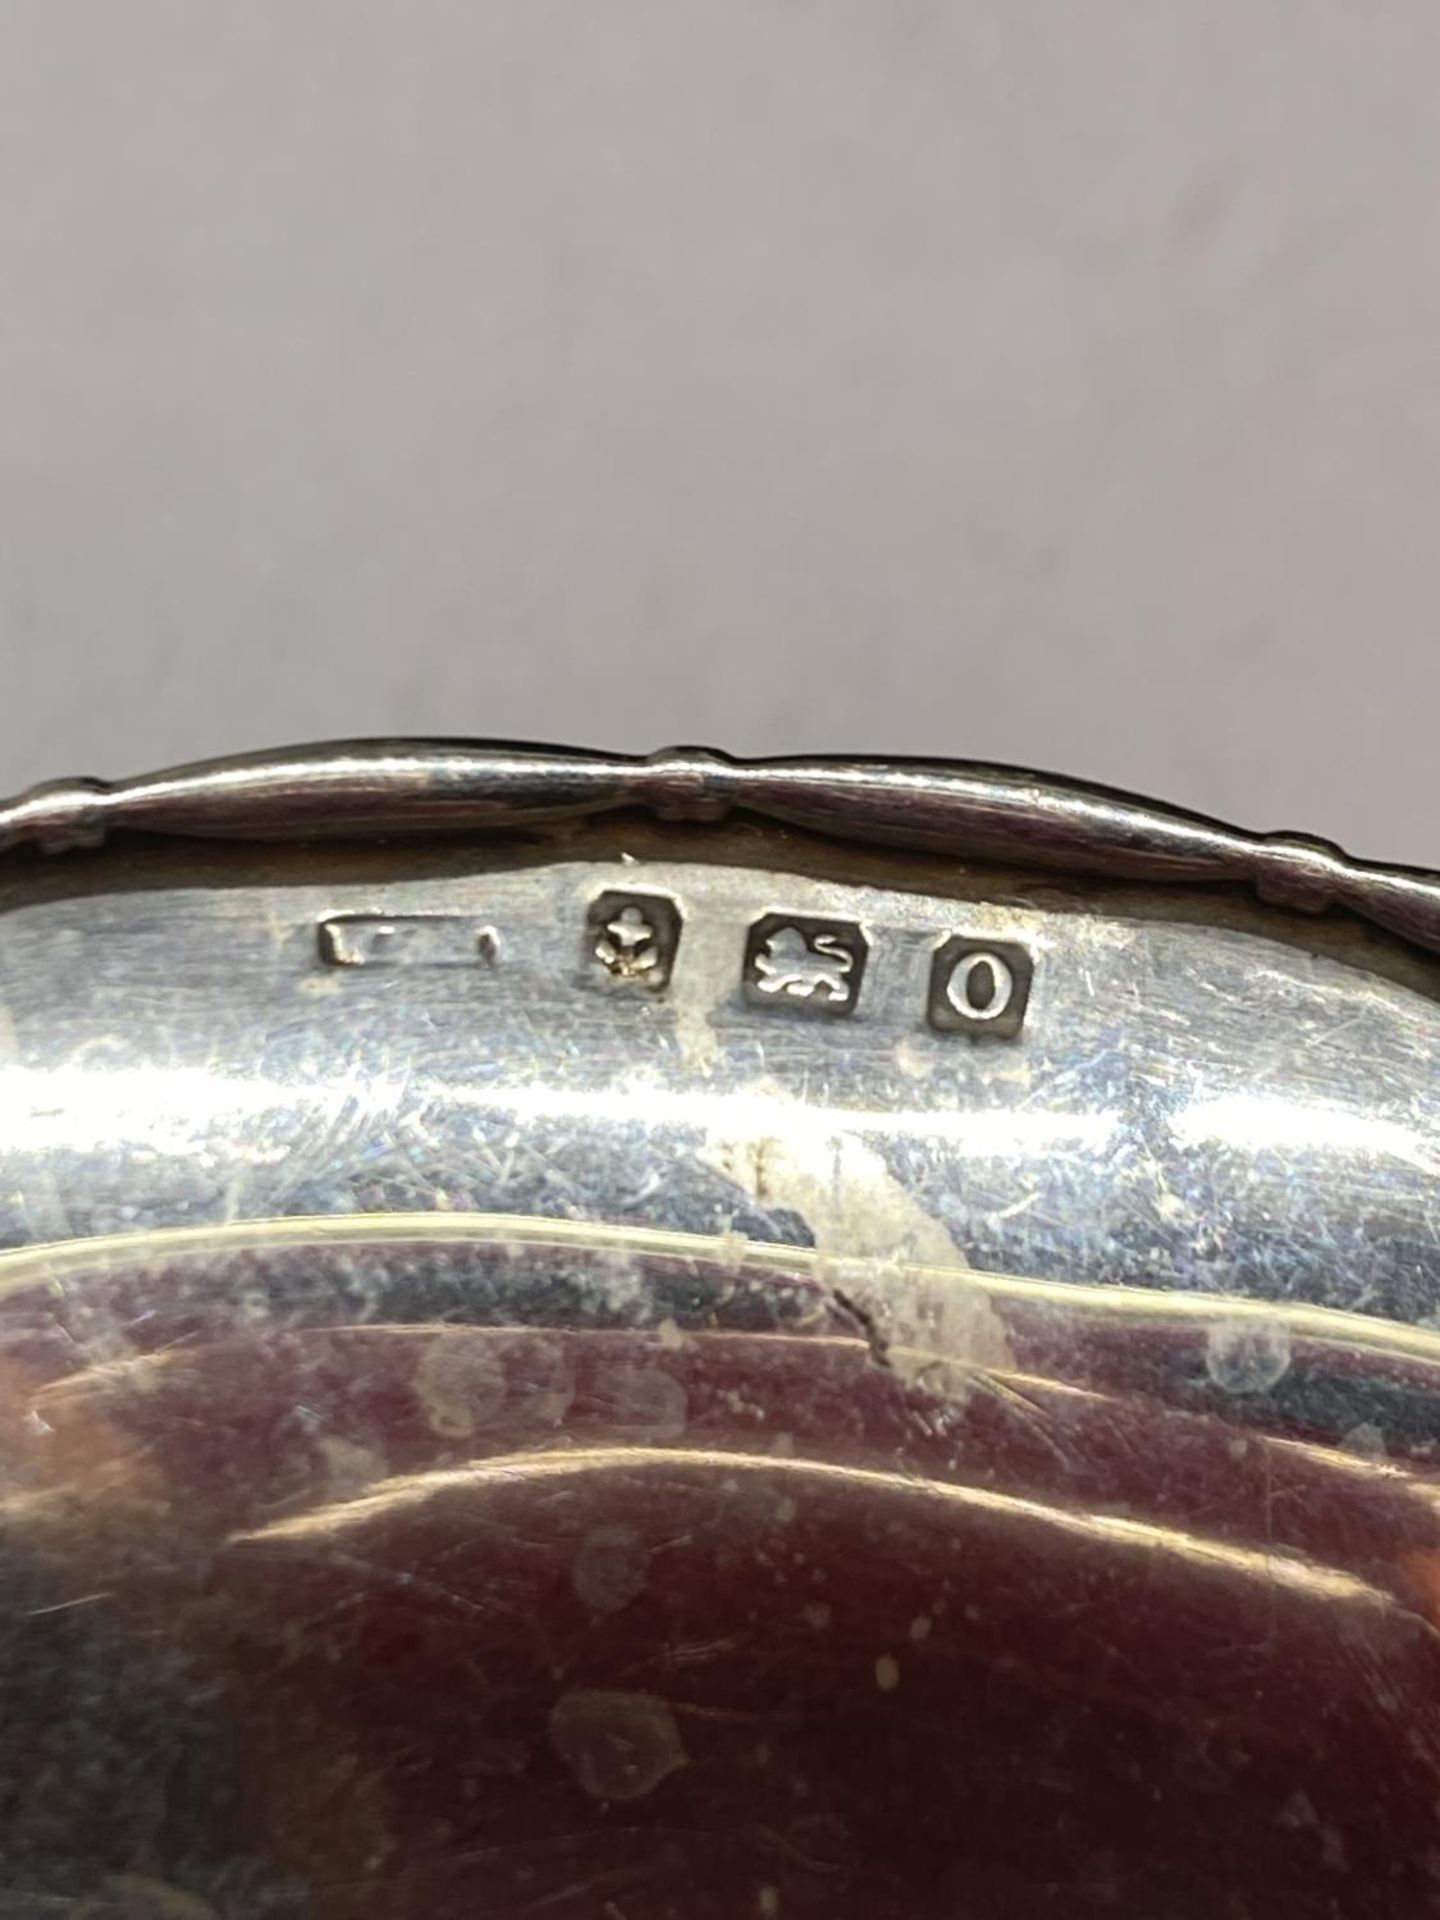 A HALLMARKED BIRMINGHAM SILVER FOOTED DISH GROSS WEIGHT 39.8 GRAMS - Image 3 of 3